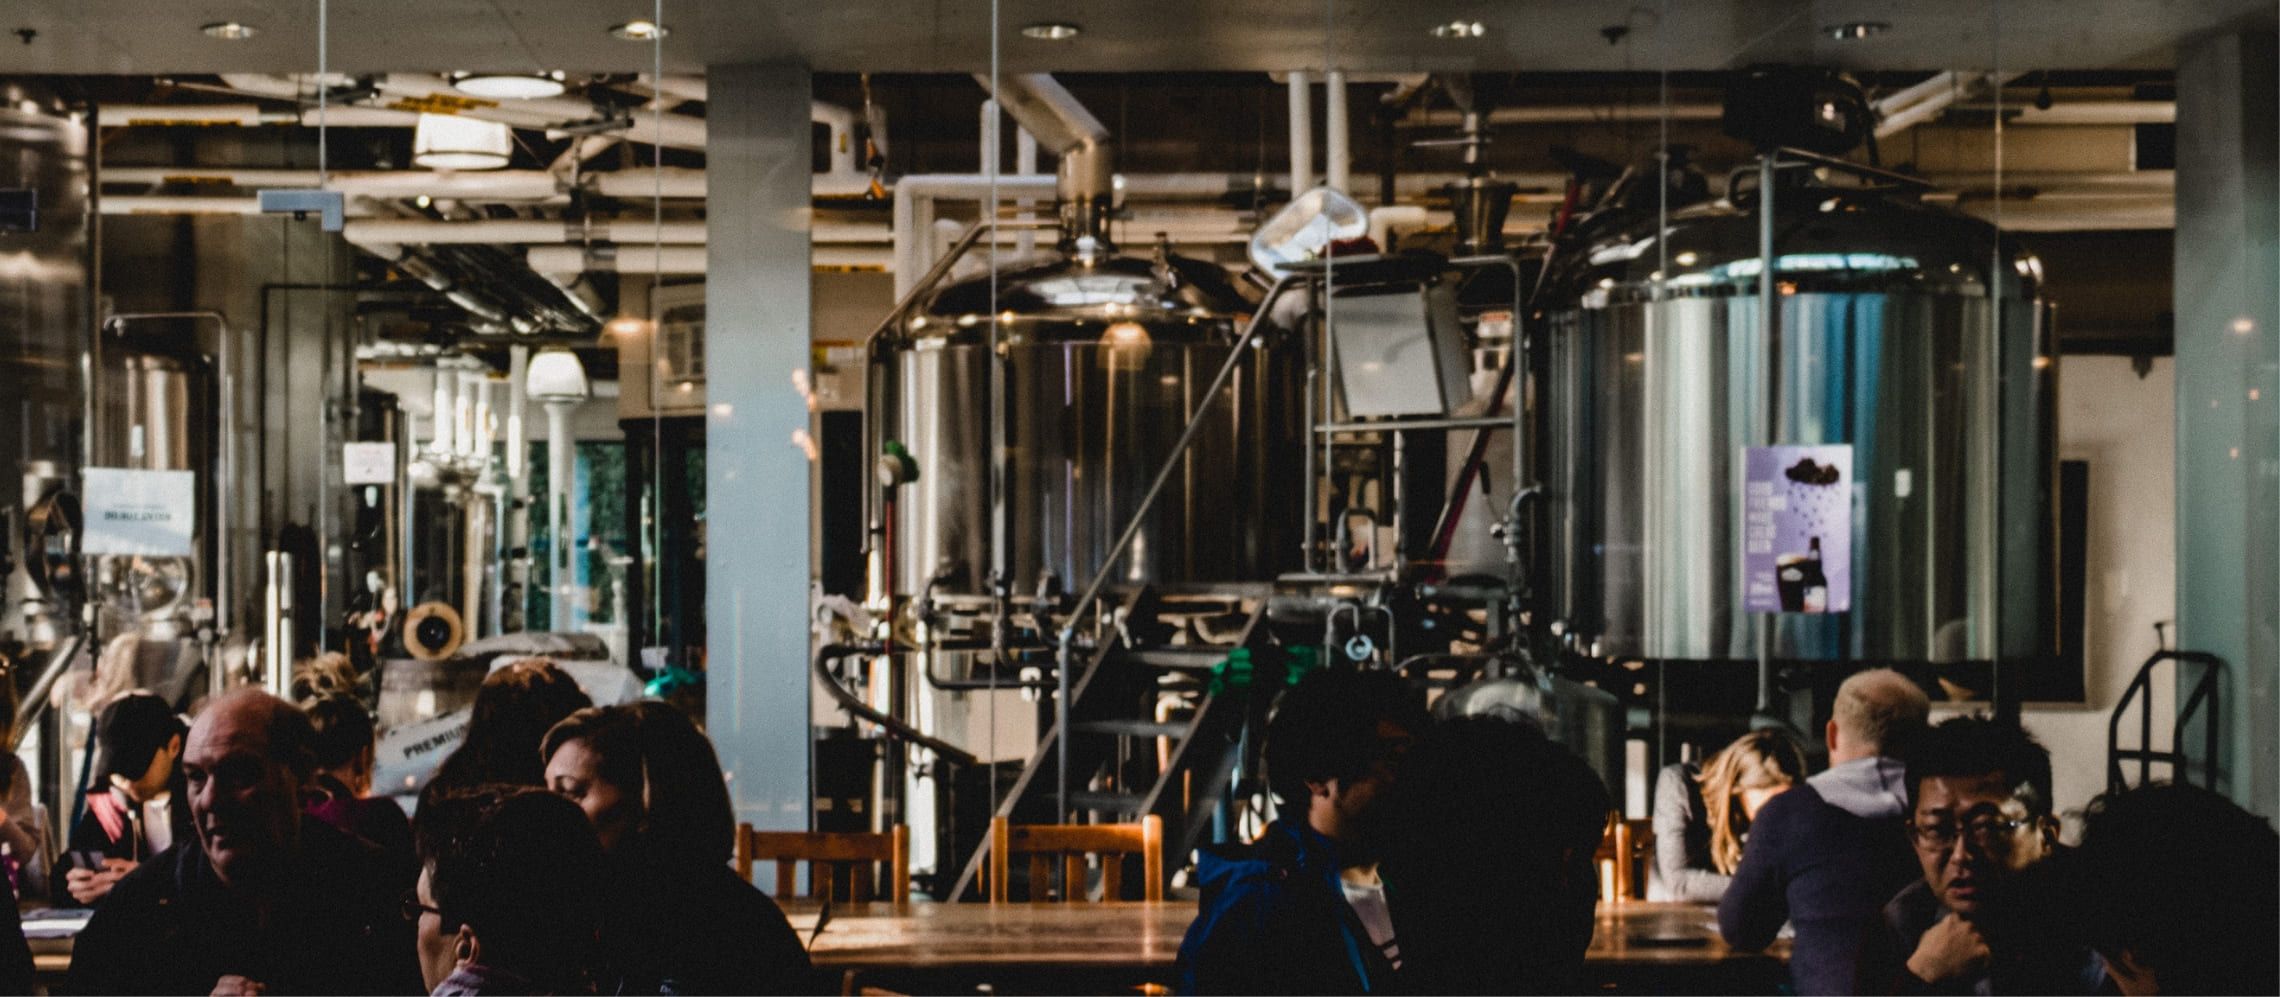 Photo for: Why Brewpubs & Microbreweries Are Brewing up a Storm